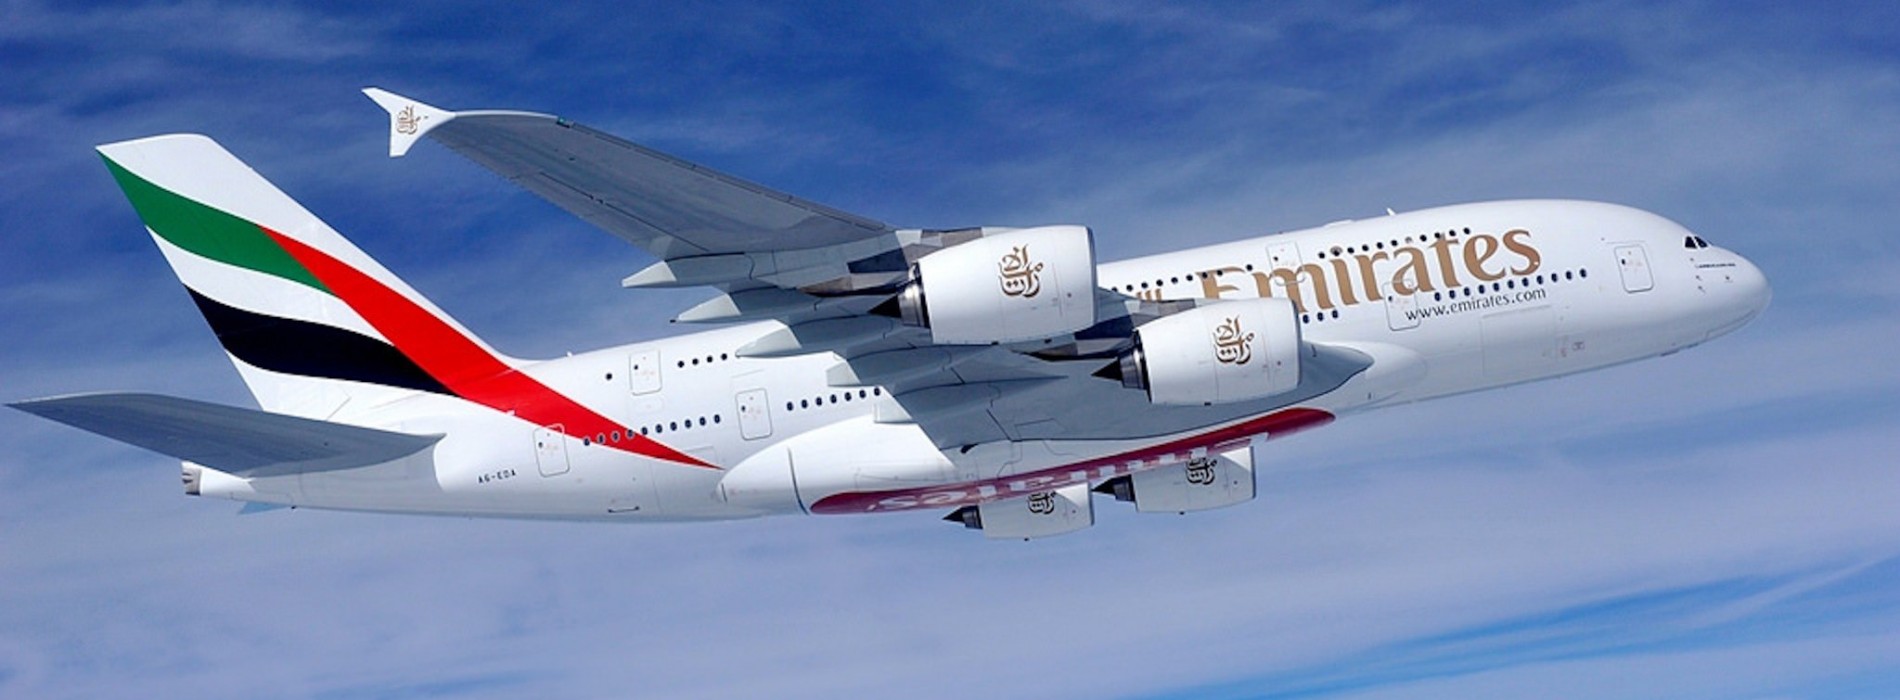 Emirates to fly to Toronto five times a week starting August 18